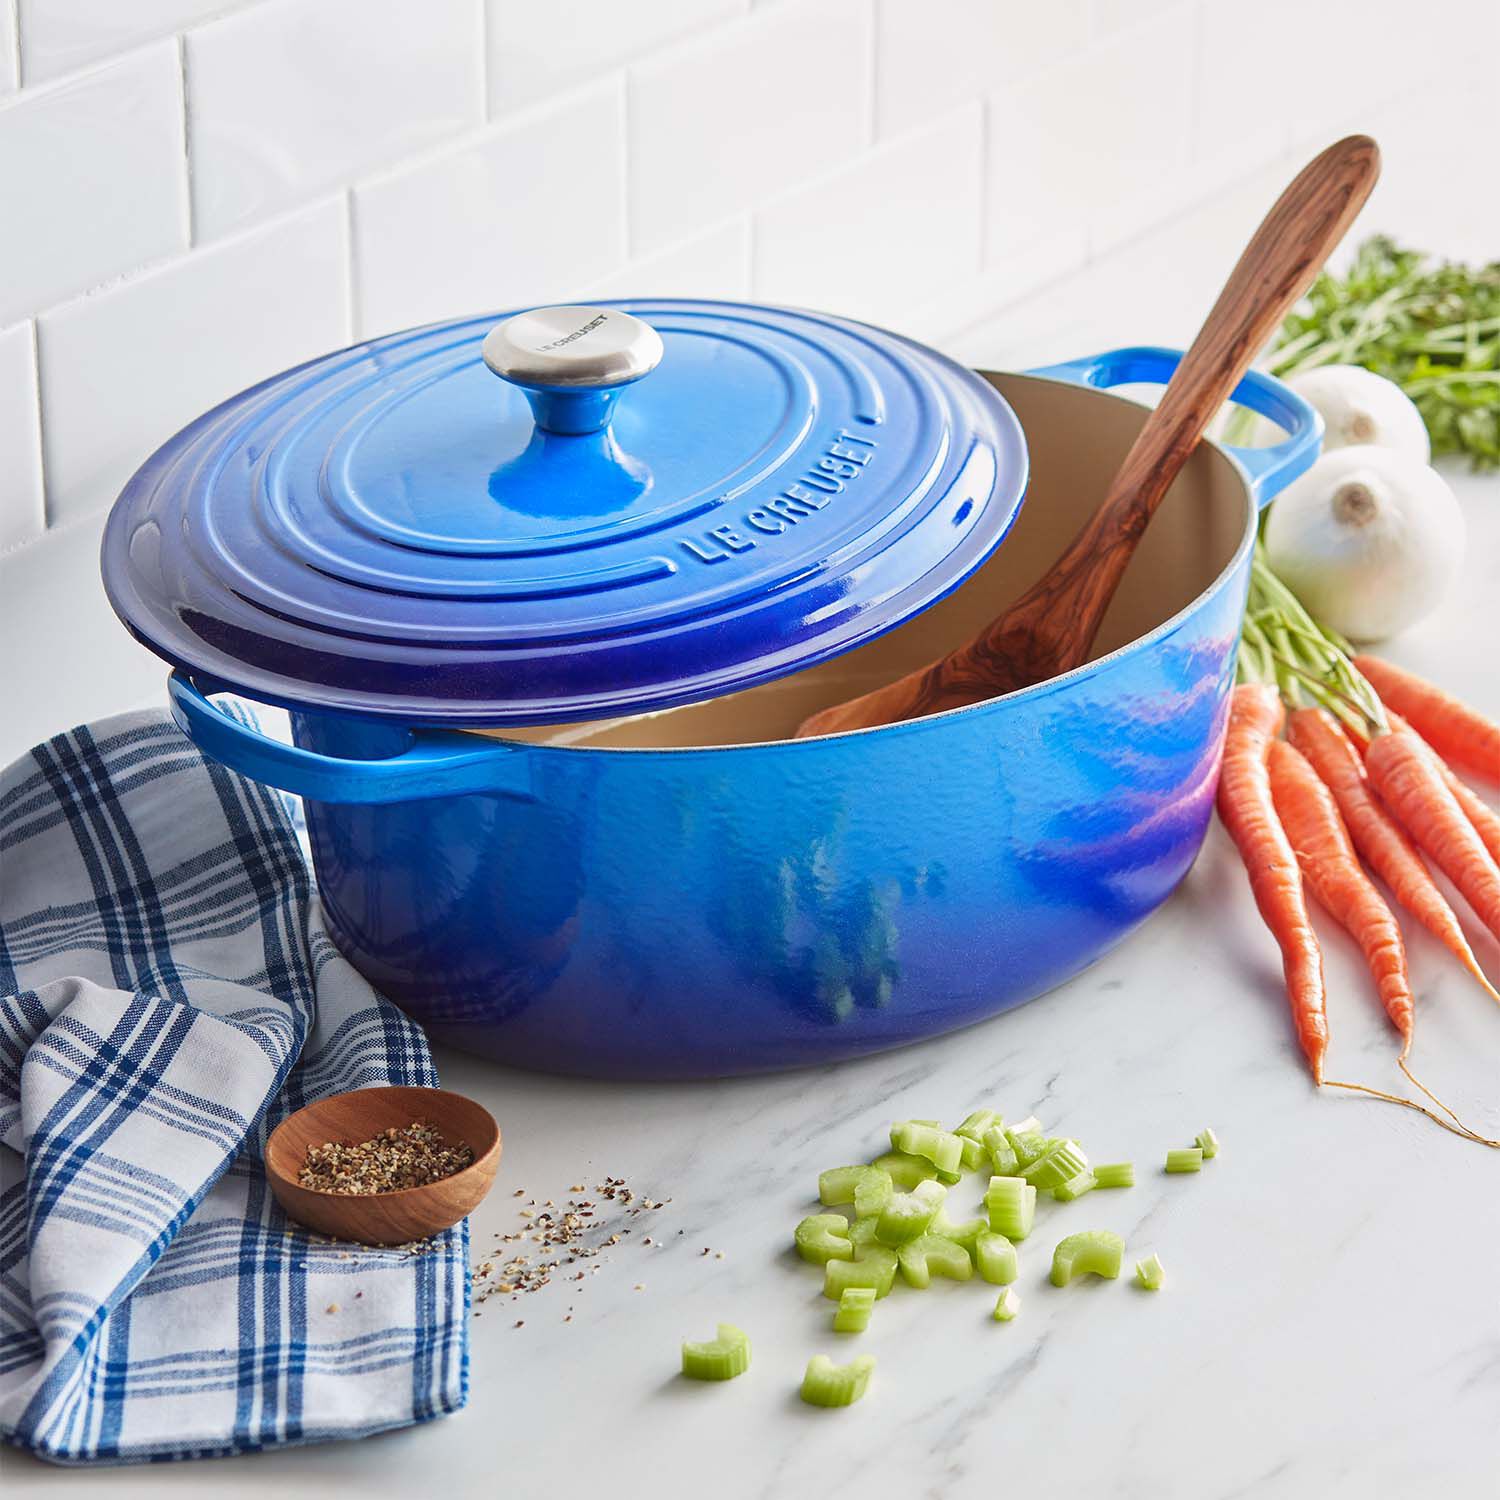 This Really Good Sale on Le Creuset Has Made My Friday